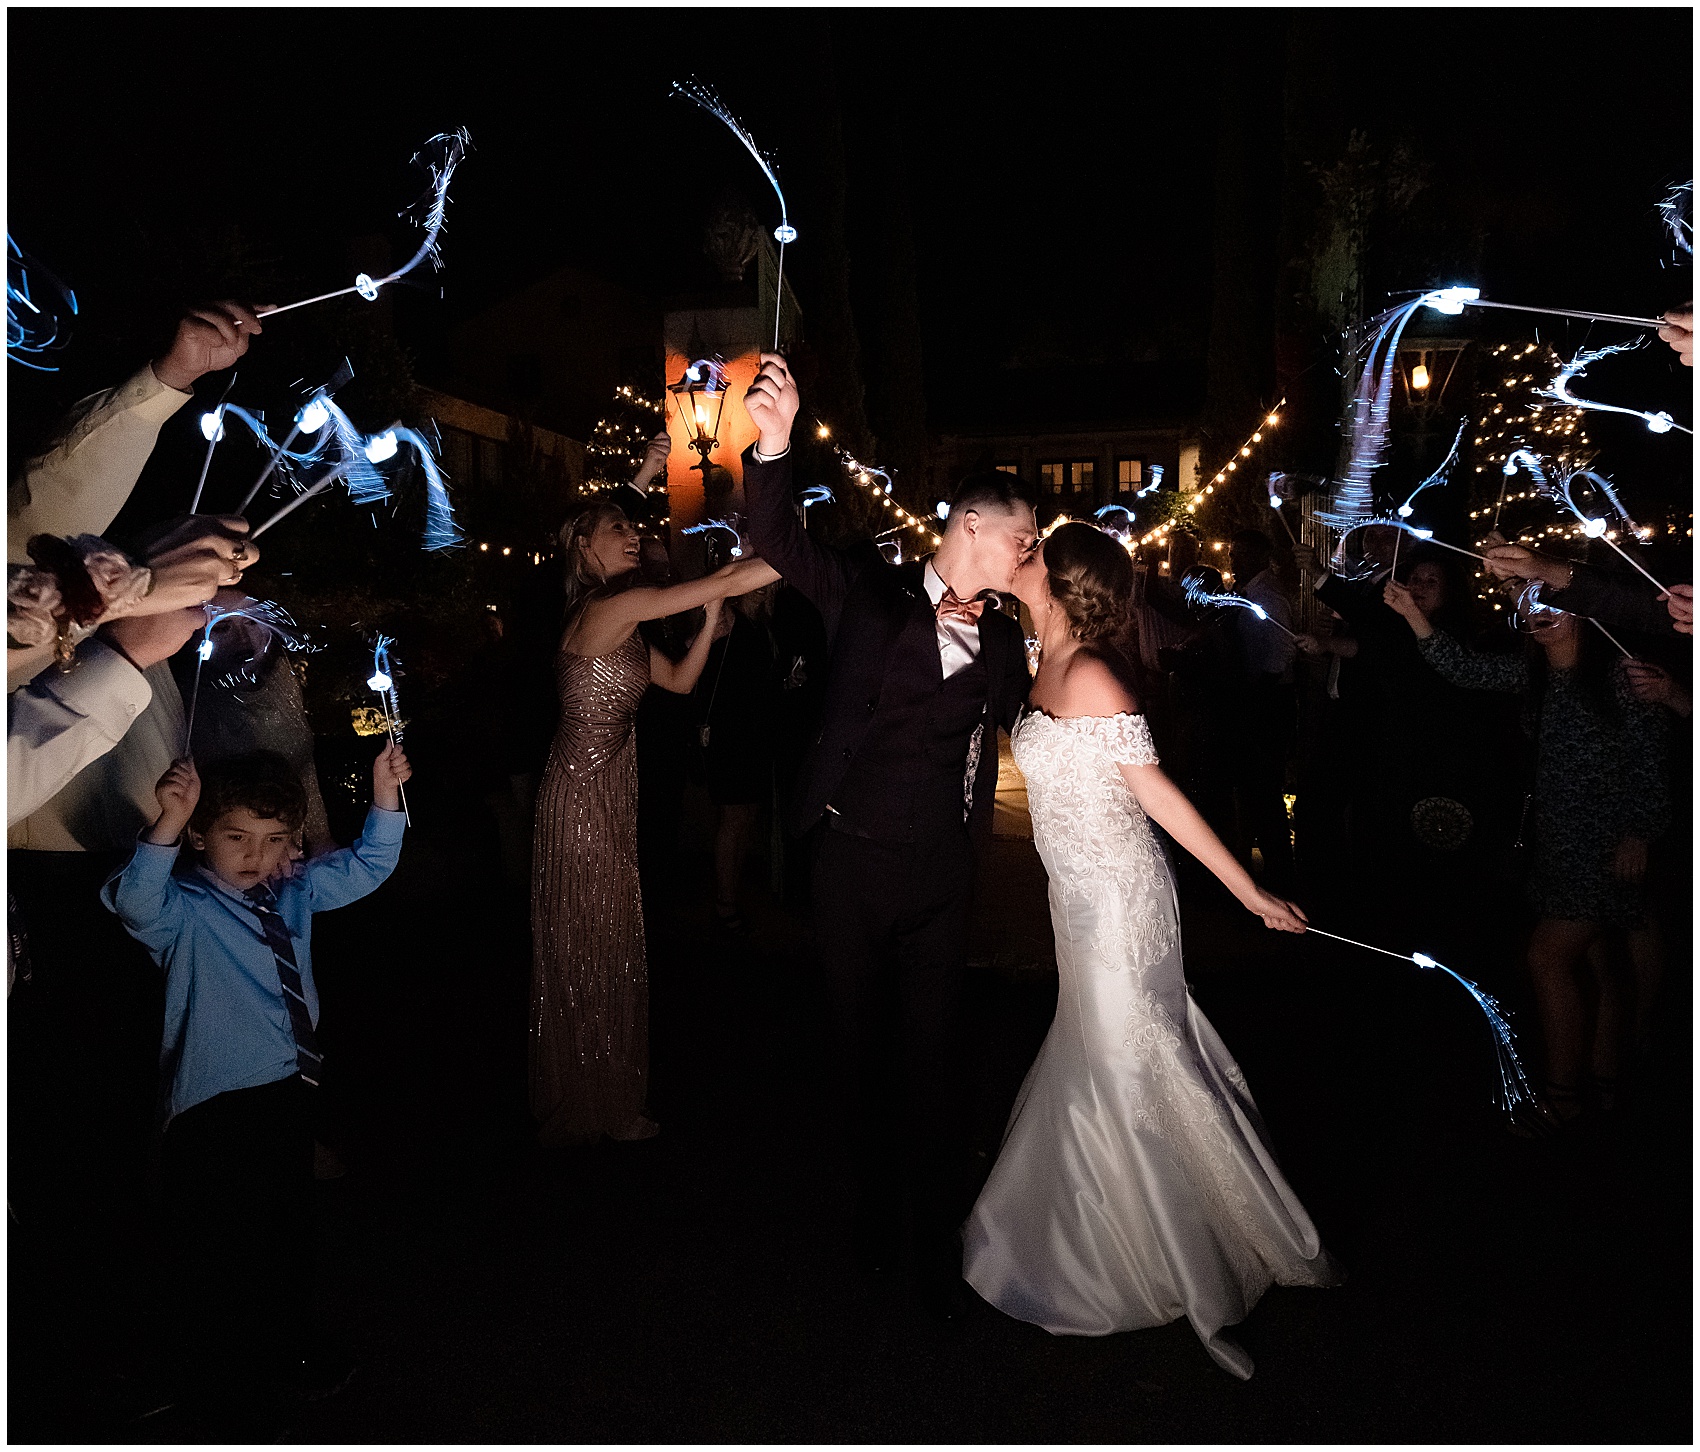 Newlyweds kiss under an aisle of sparkler sticks being waved by guests at the end of their club continental wedding